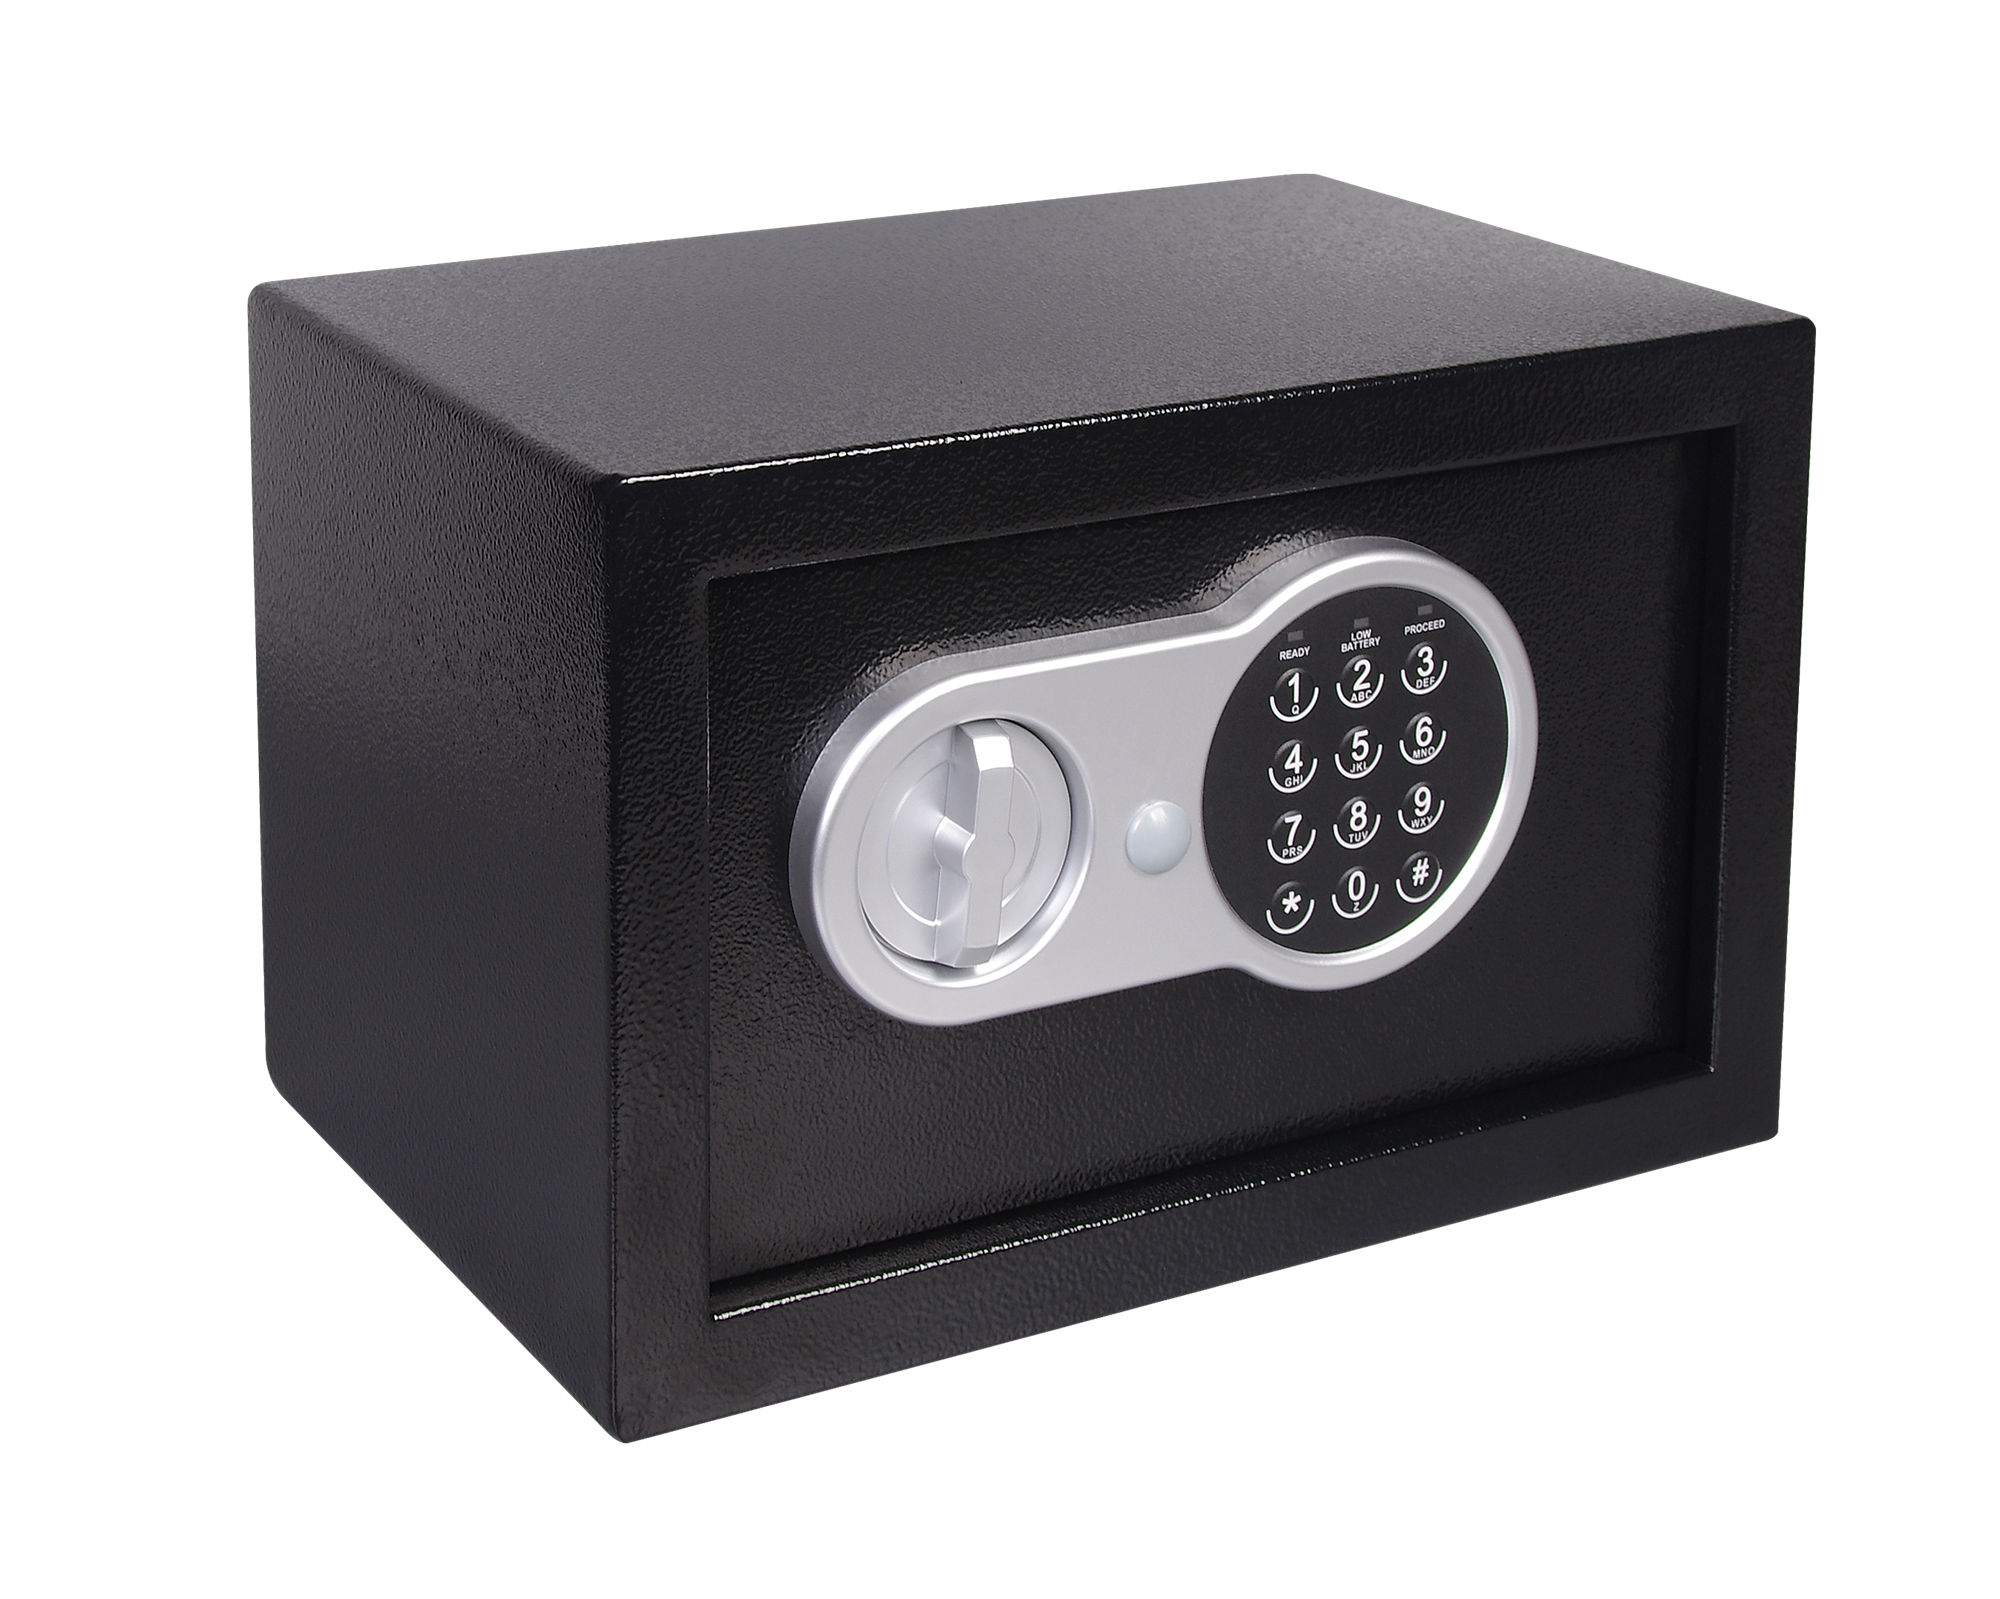 Biometric Safes; The ‘Worth the Investment’ Kind of Security